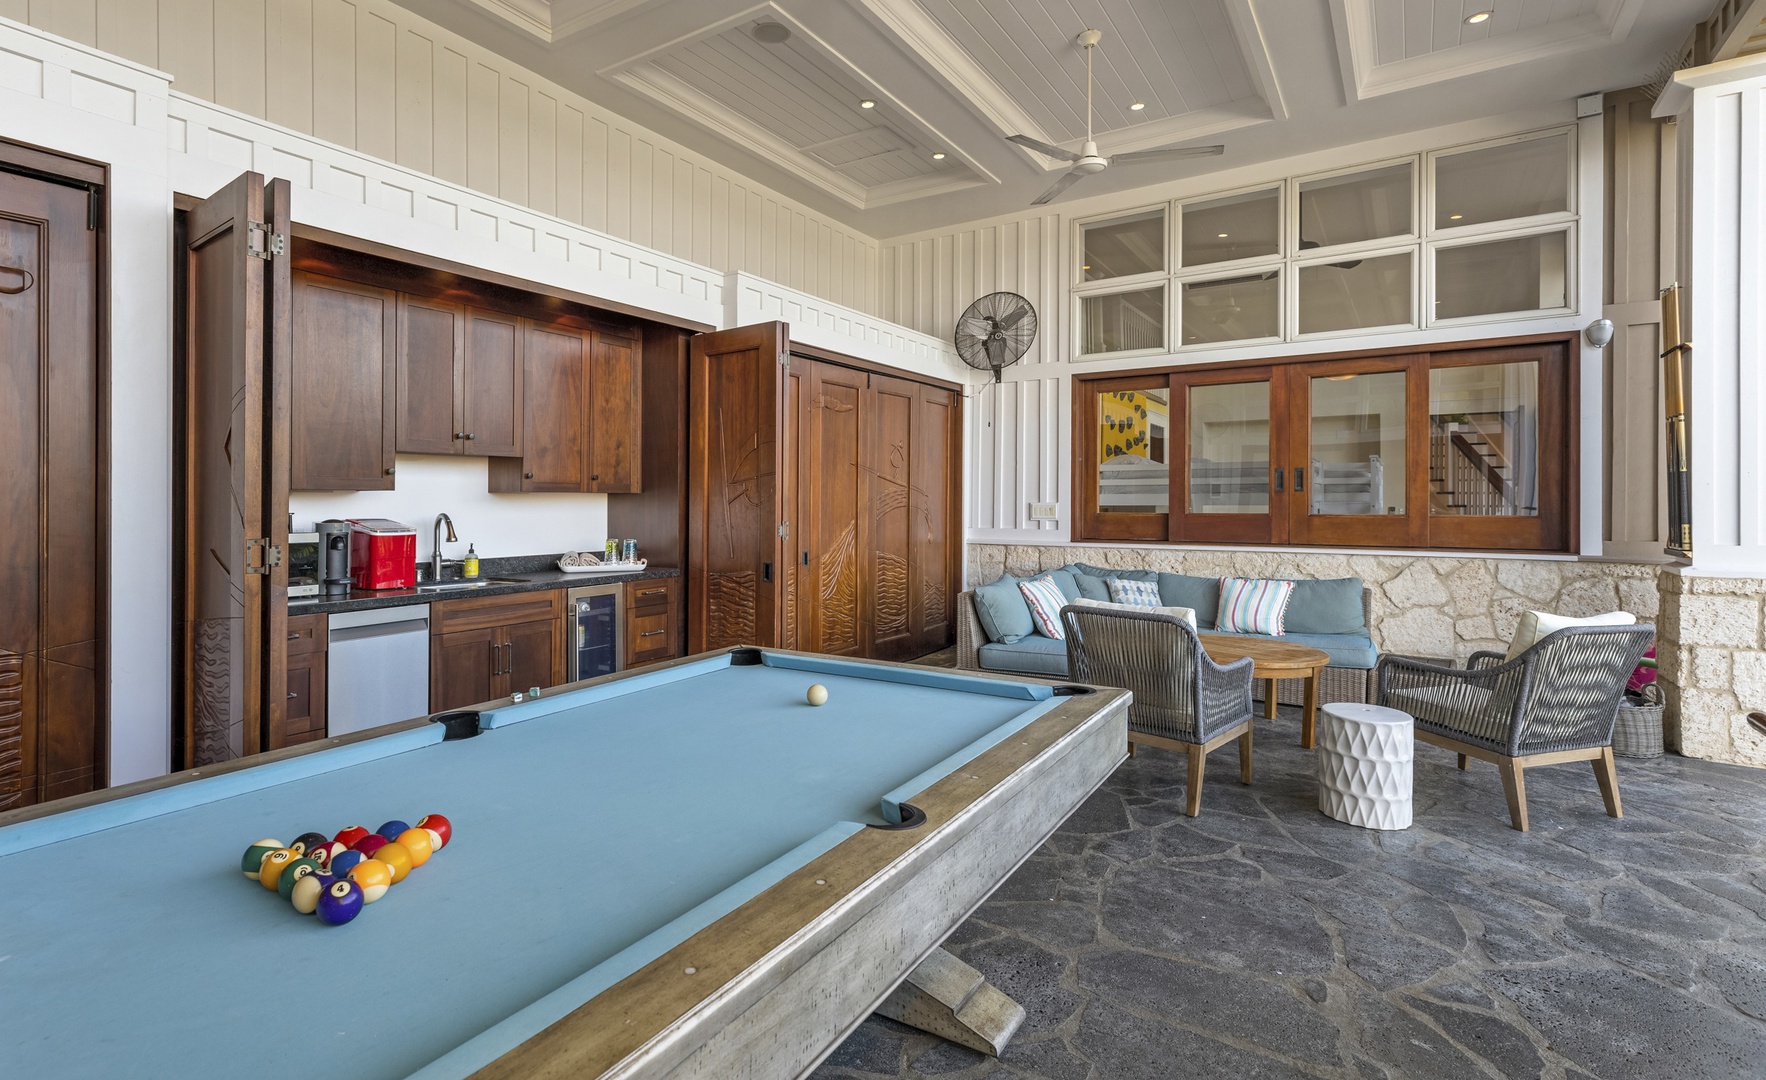 Kailua Vacation Rentals, Lanikai Villa* - The pool table offers an opportunity for fun and competition!